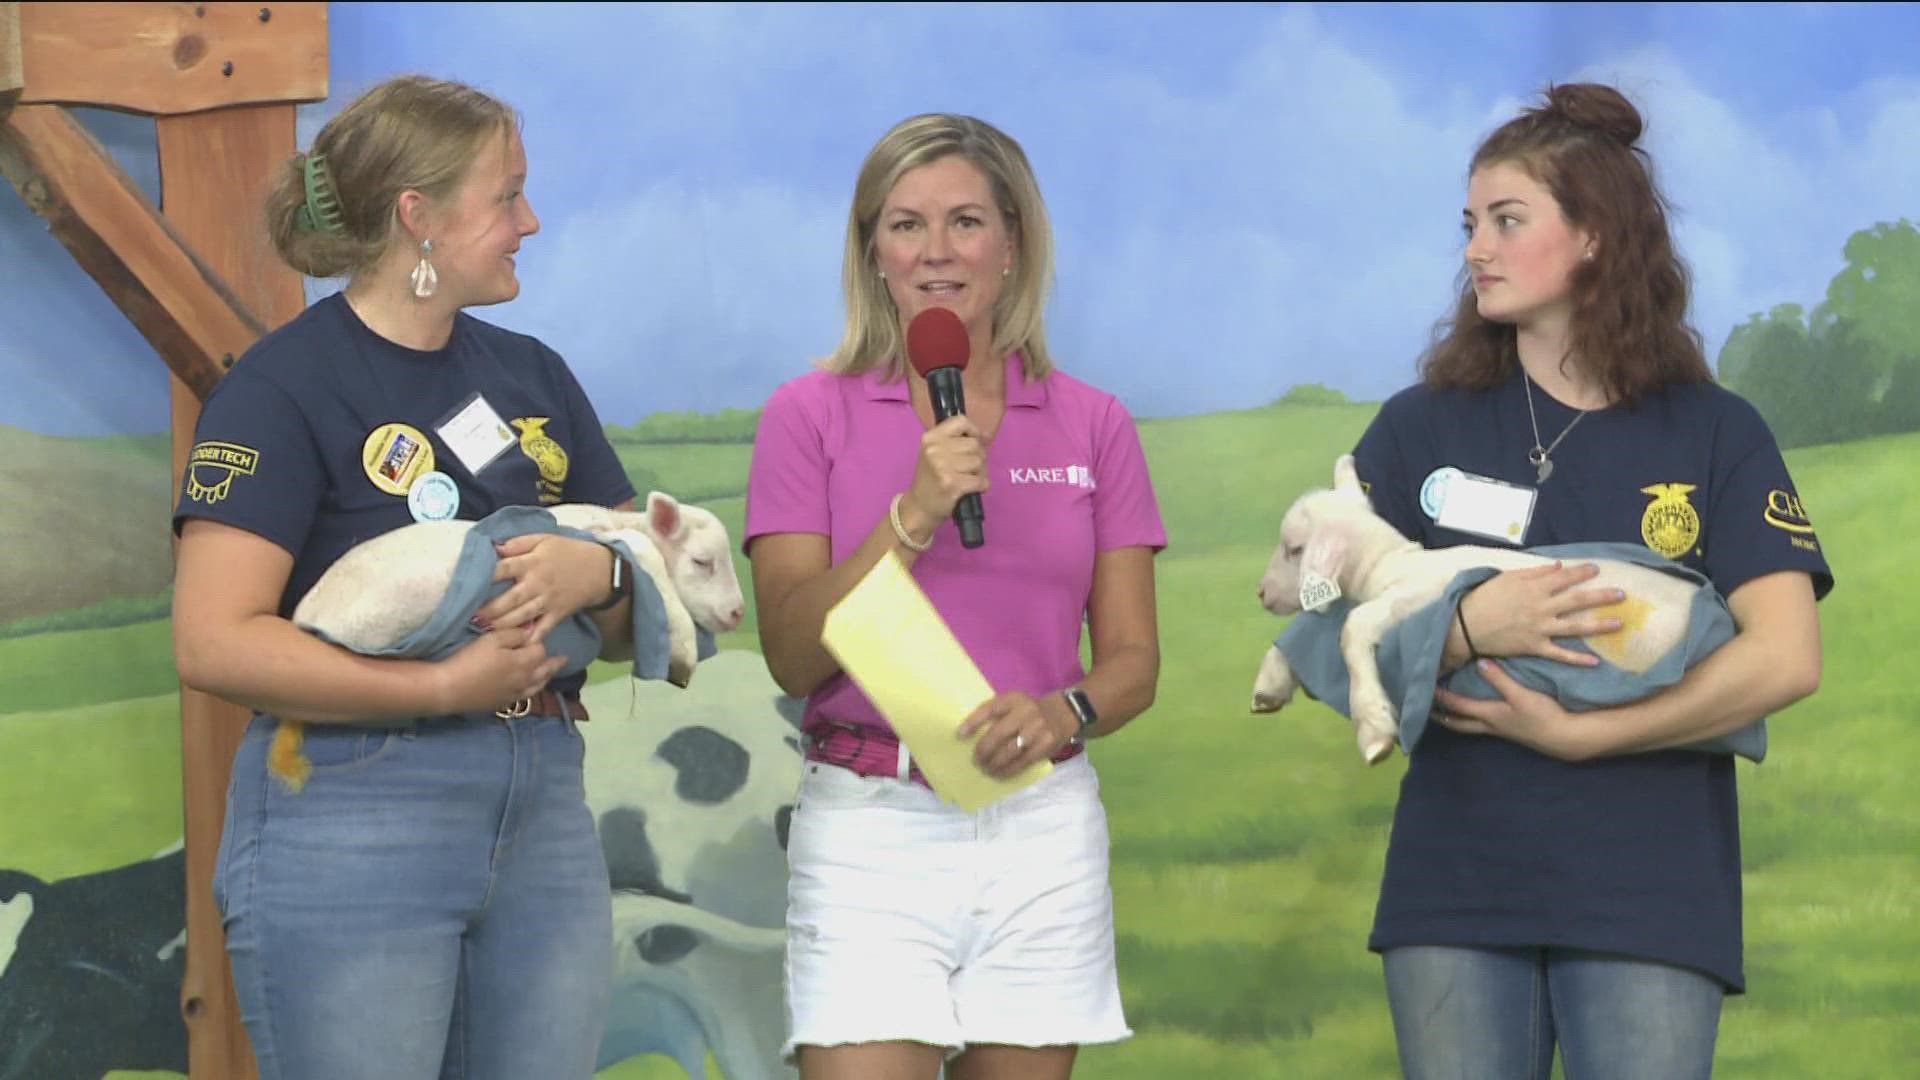 The agricultural education exhibit features many baby animals and is staffed by FFA volunteers.